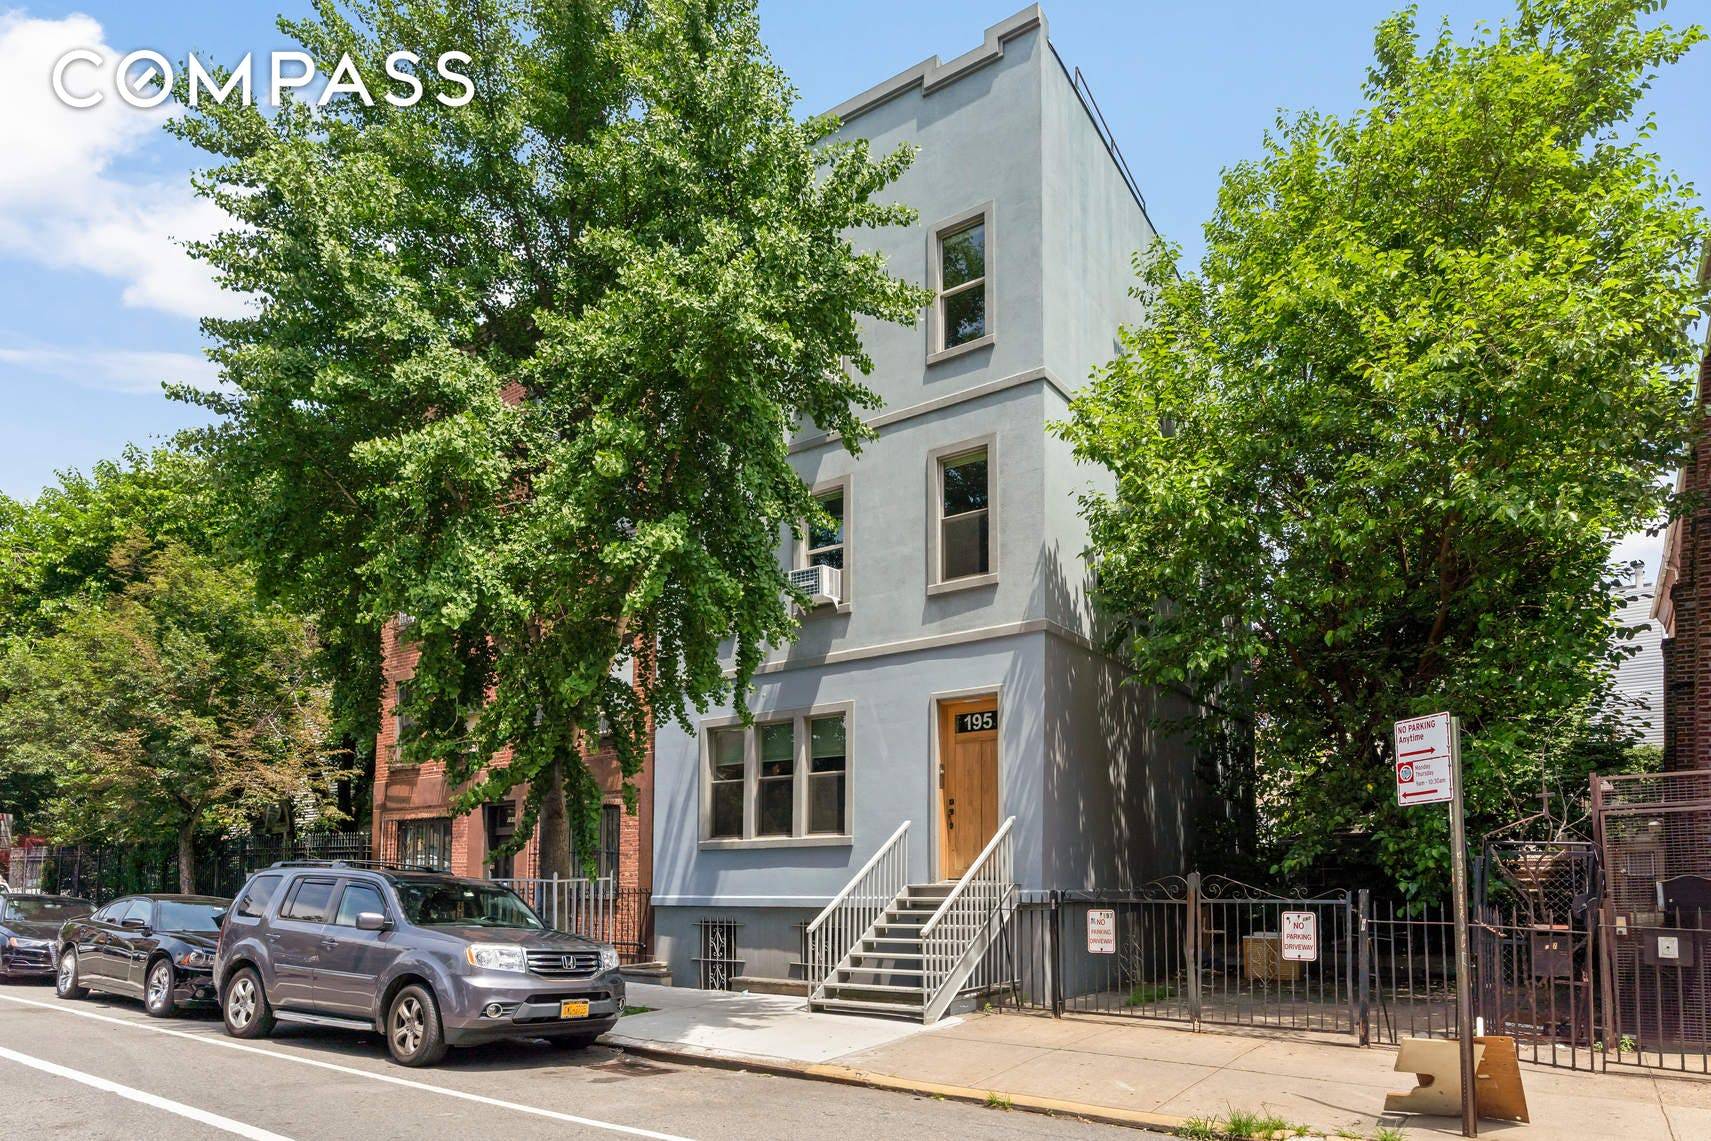 Welcome to 195 N. 5th Street, a remarkable three family home on a tree lined block in prime Williamsburg.